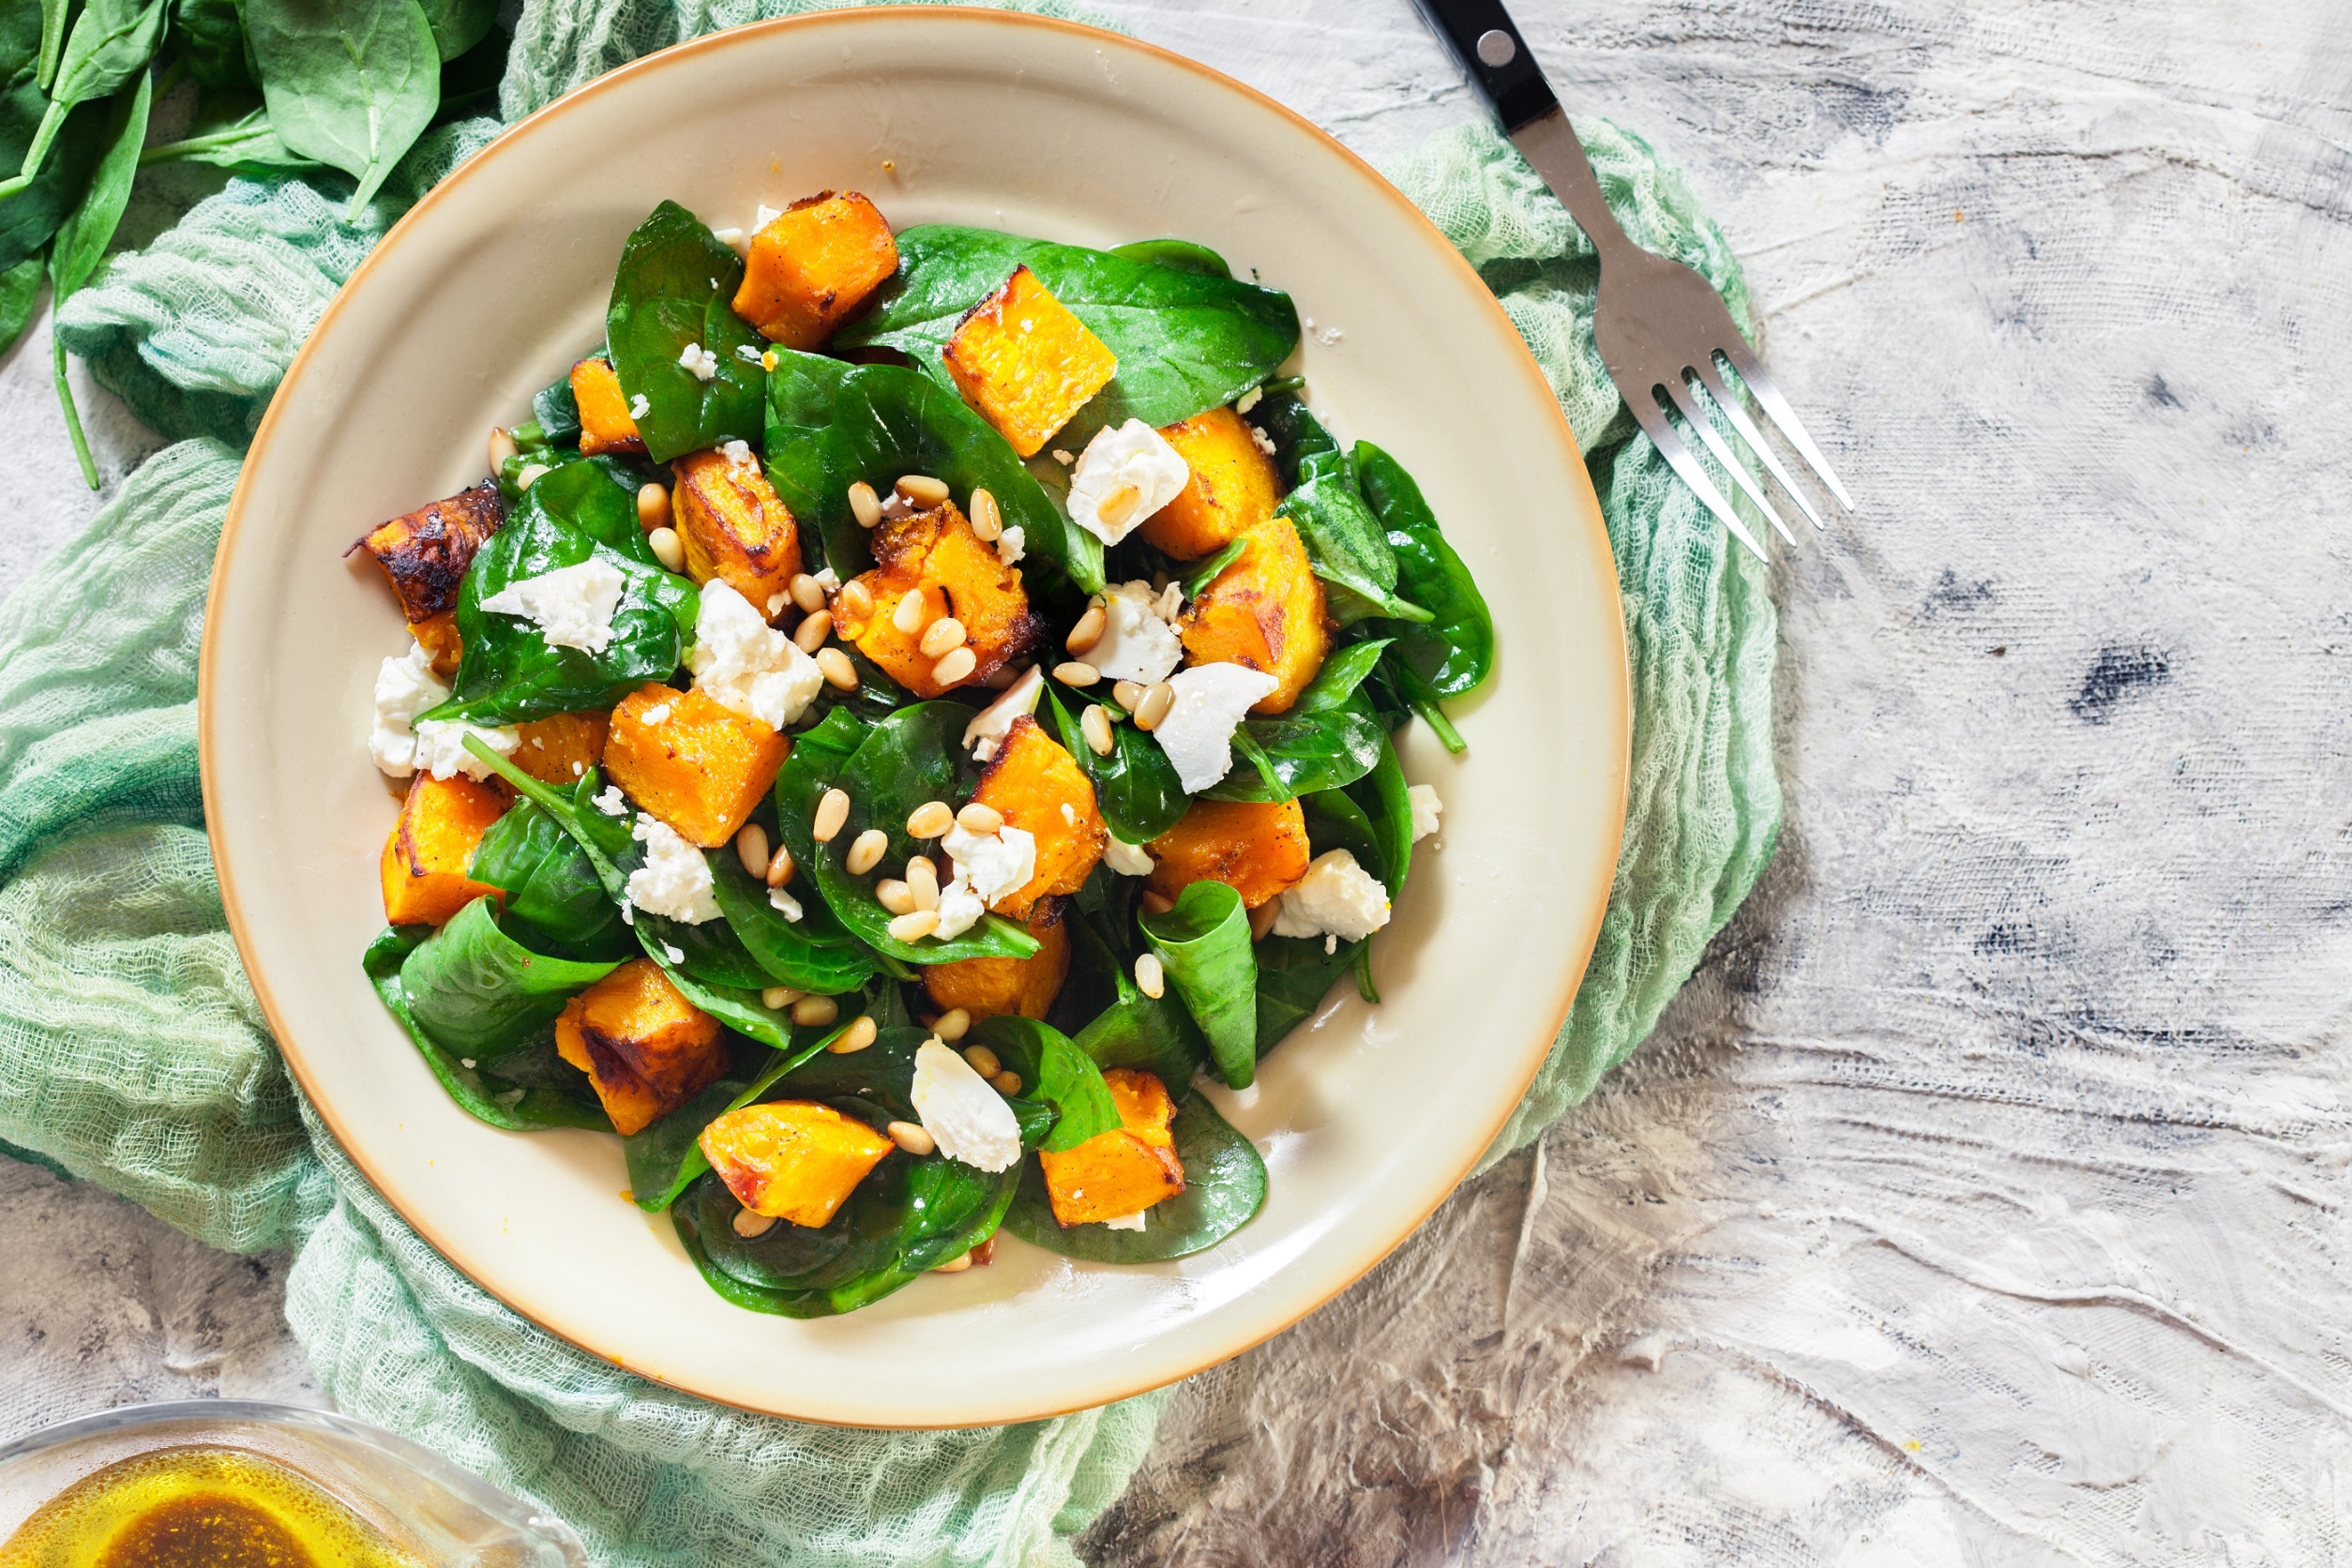 Roasted pumpkin salad with spinach, feta and pine nuts. Autumn dish